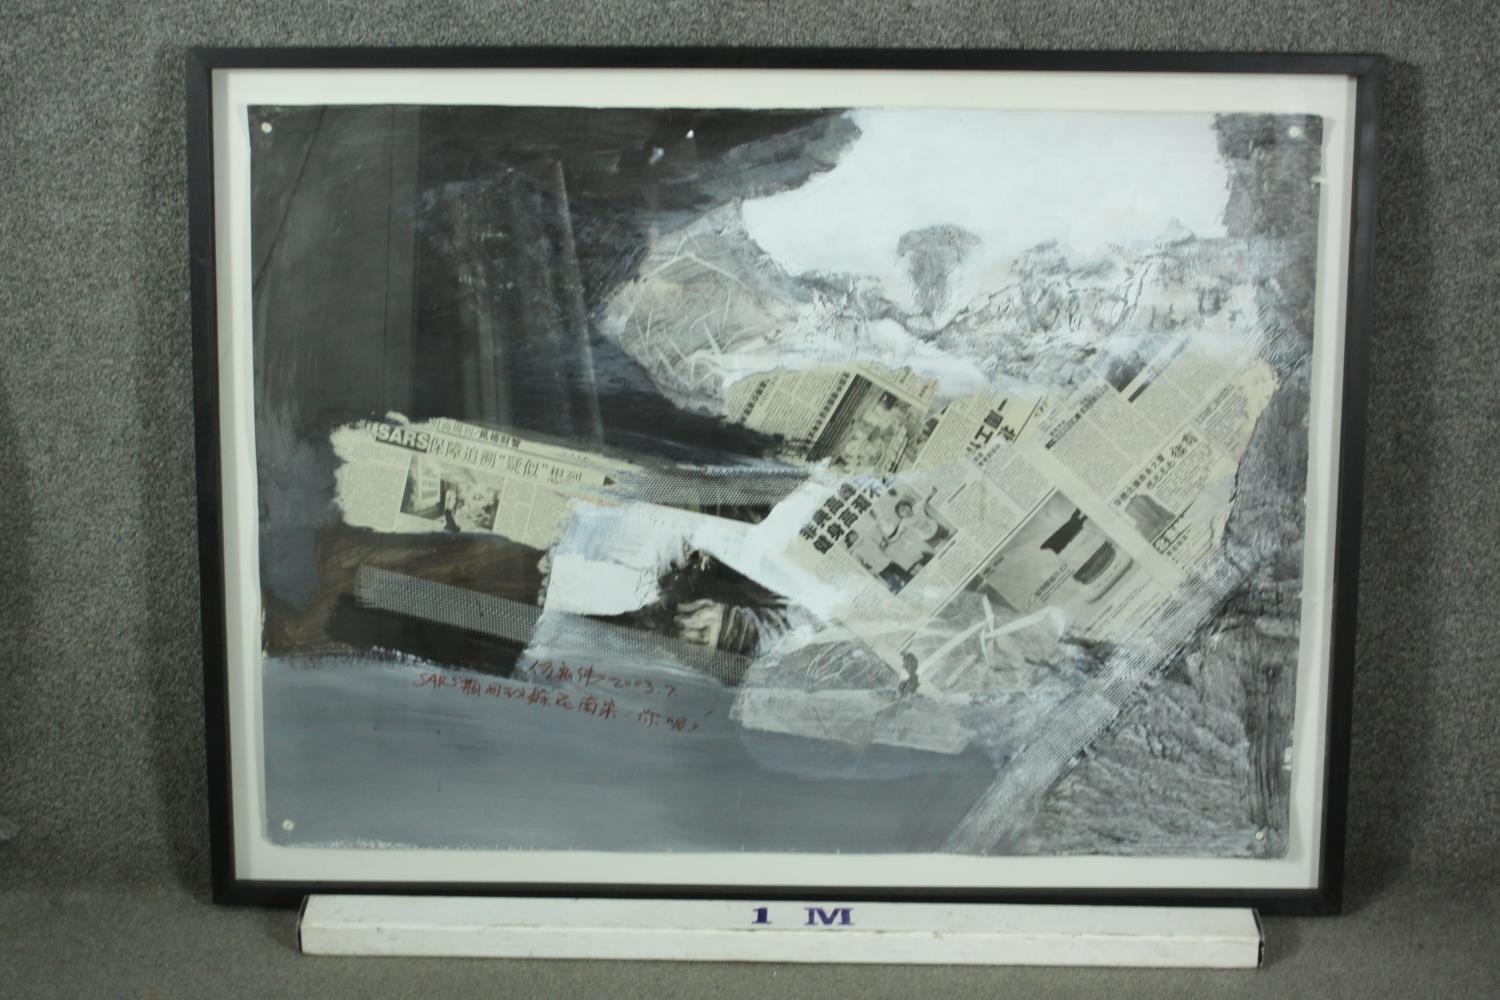 He Hong Wei, 1971, "Untitled" Mixed media on paper, label verso. H.92 W.120cm. - Image 3 of 10